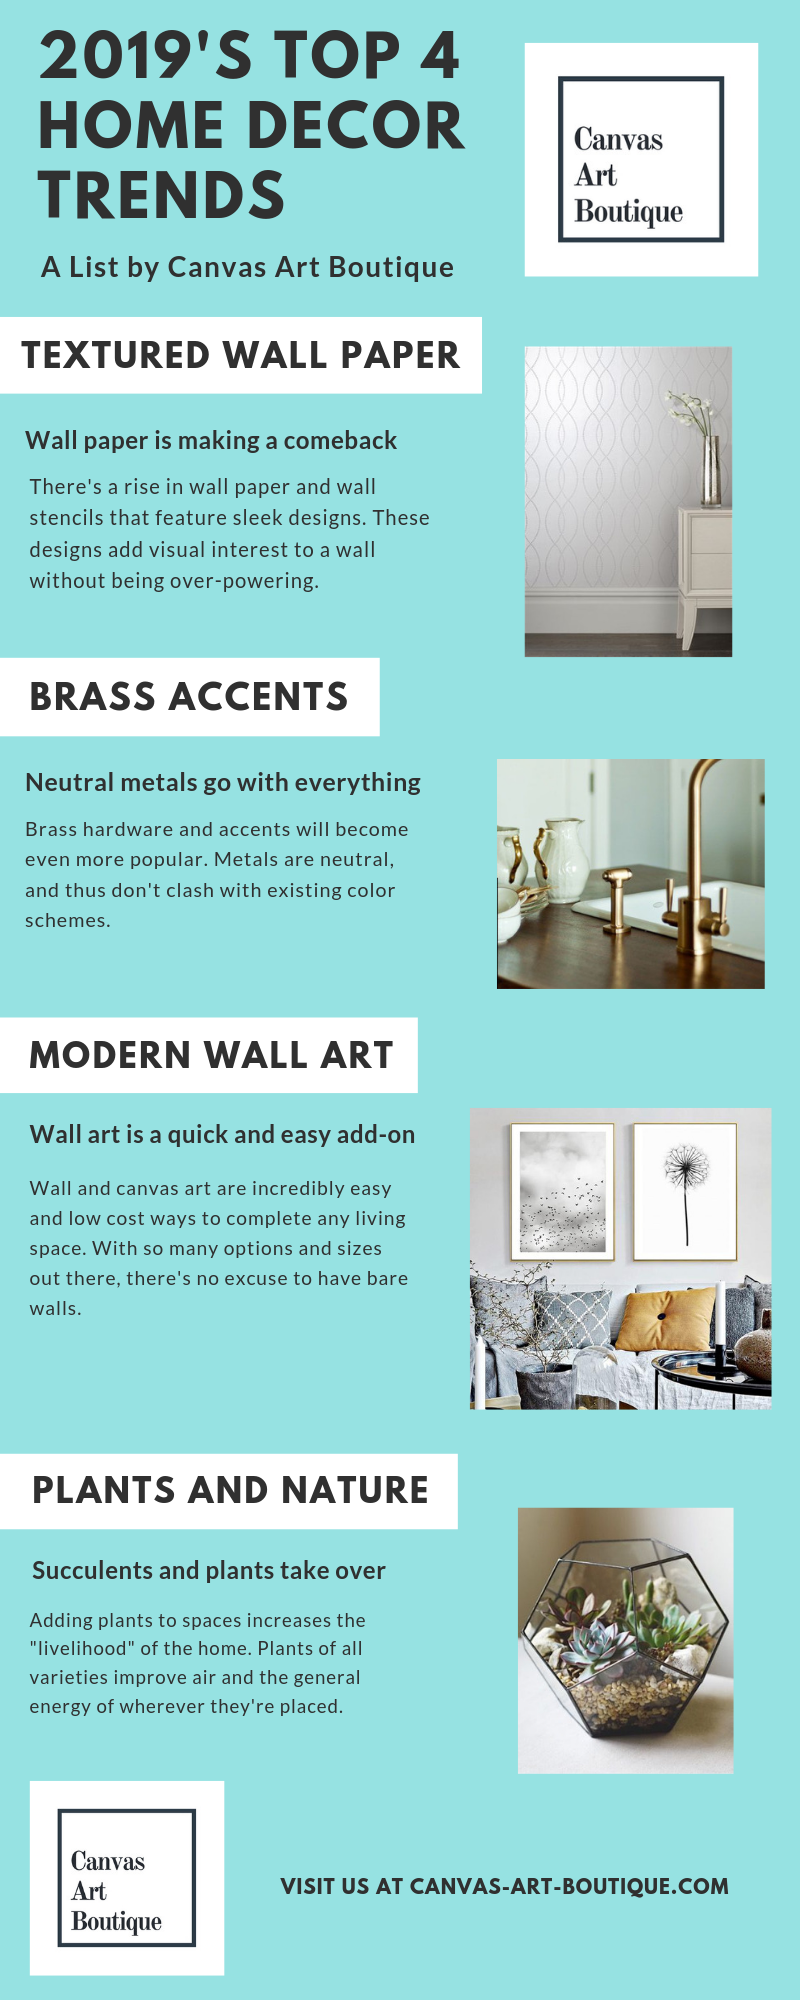 2019's Top 4 Home Decor Trends: An Infographic